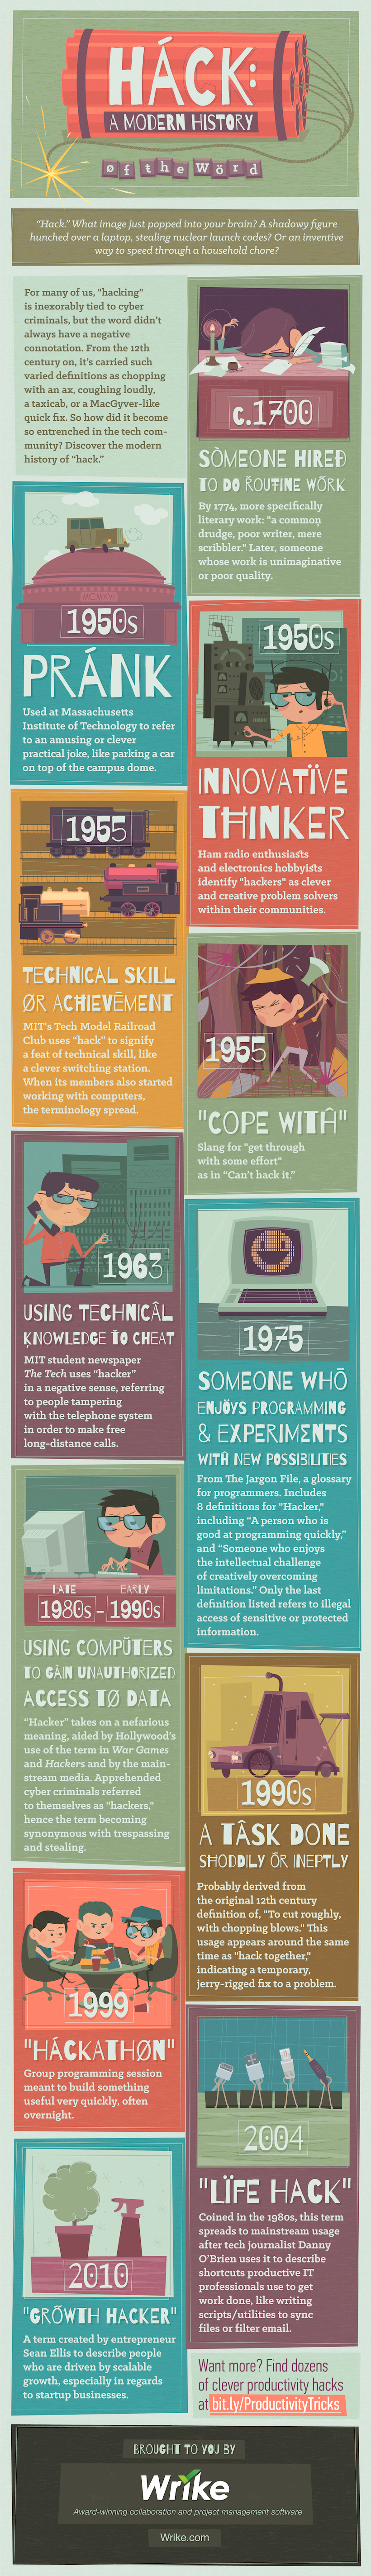 The History of the Word 'Hack' - by Wrike project management software